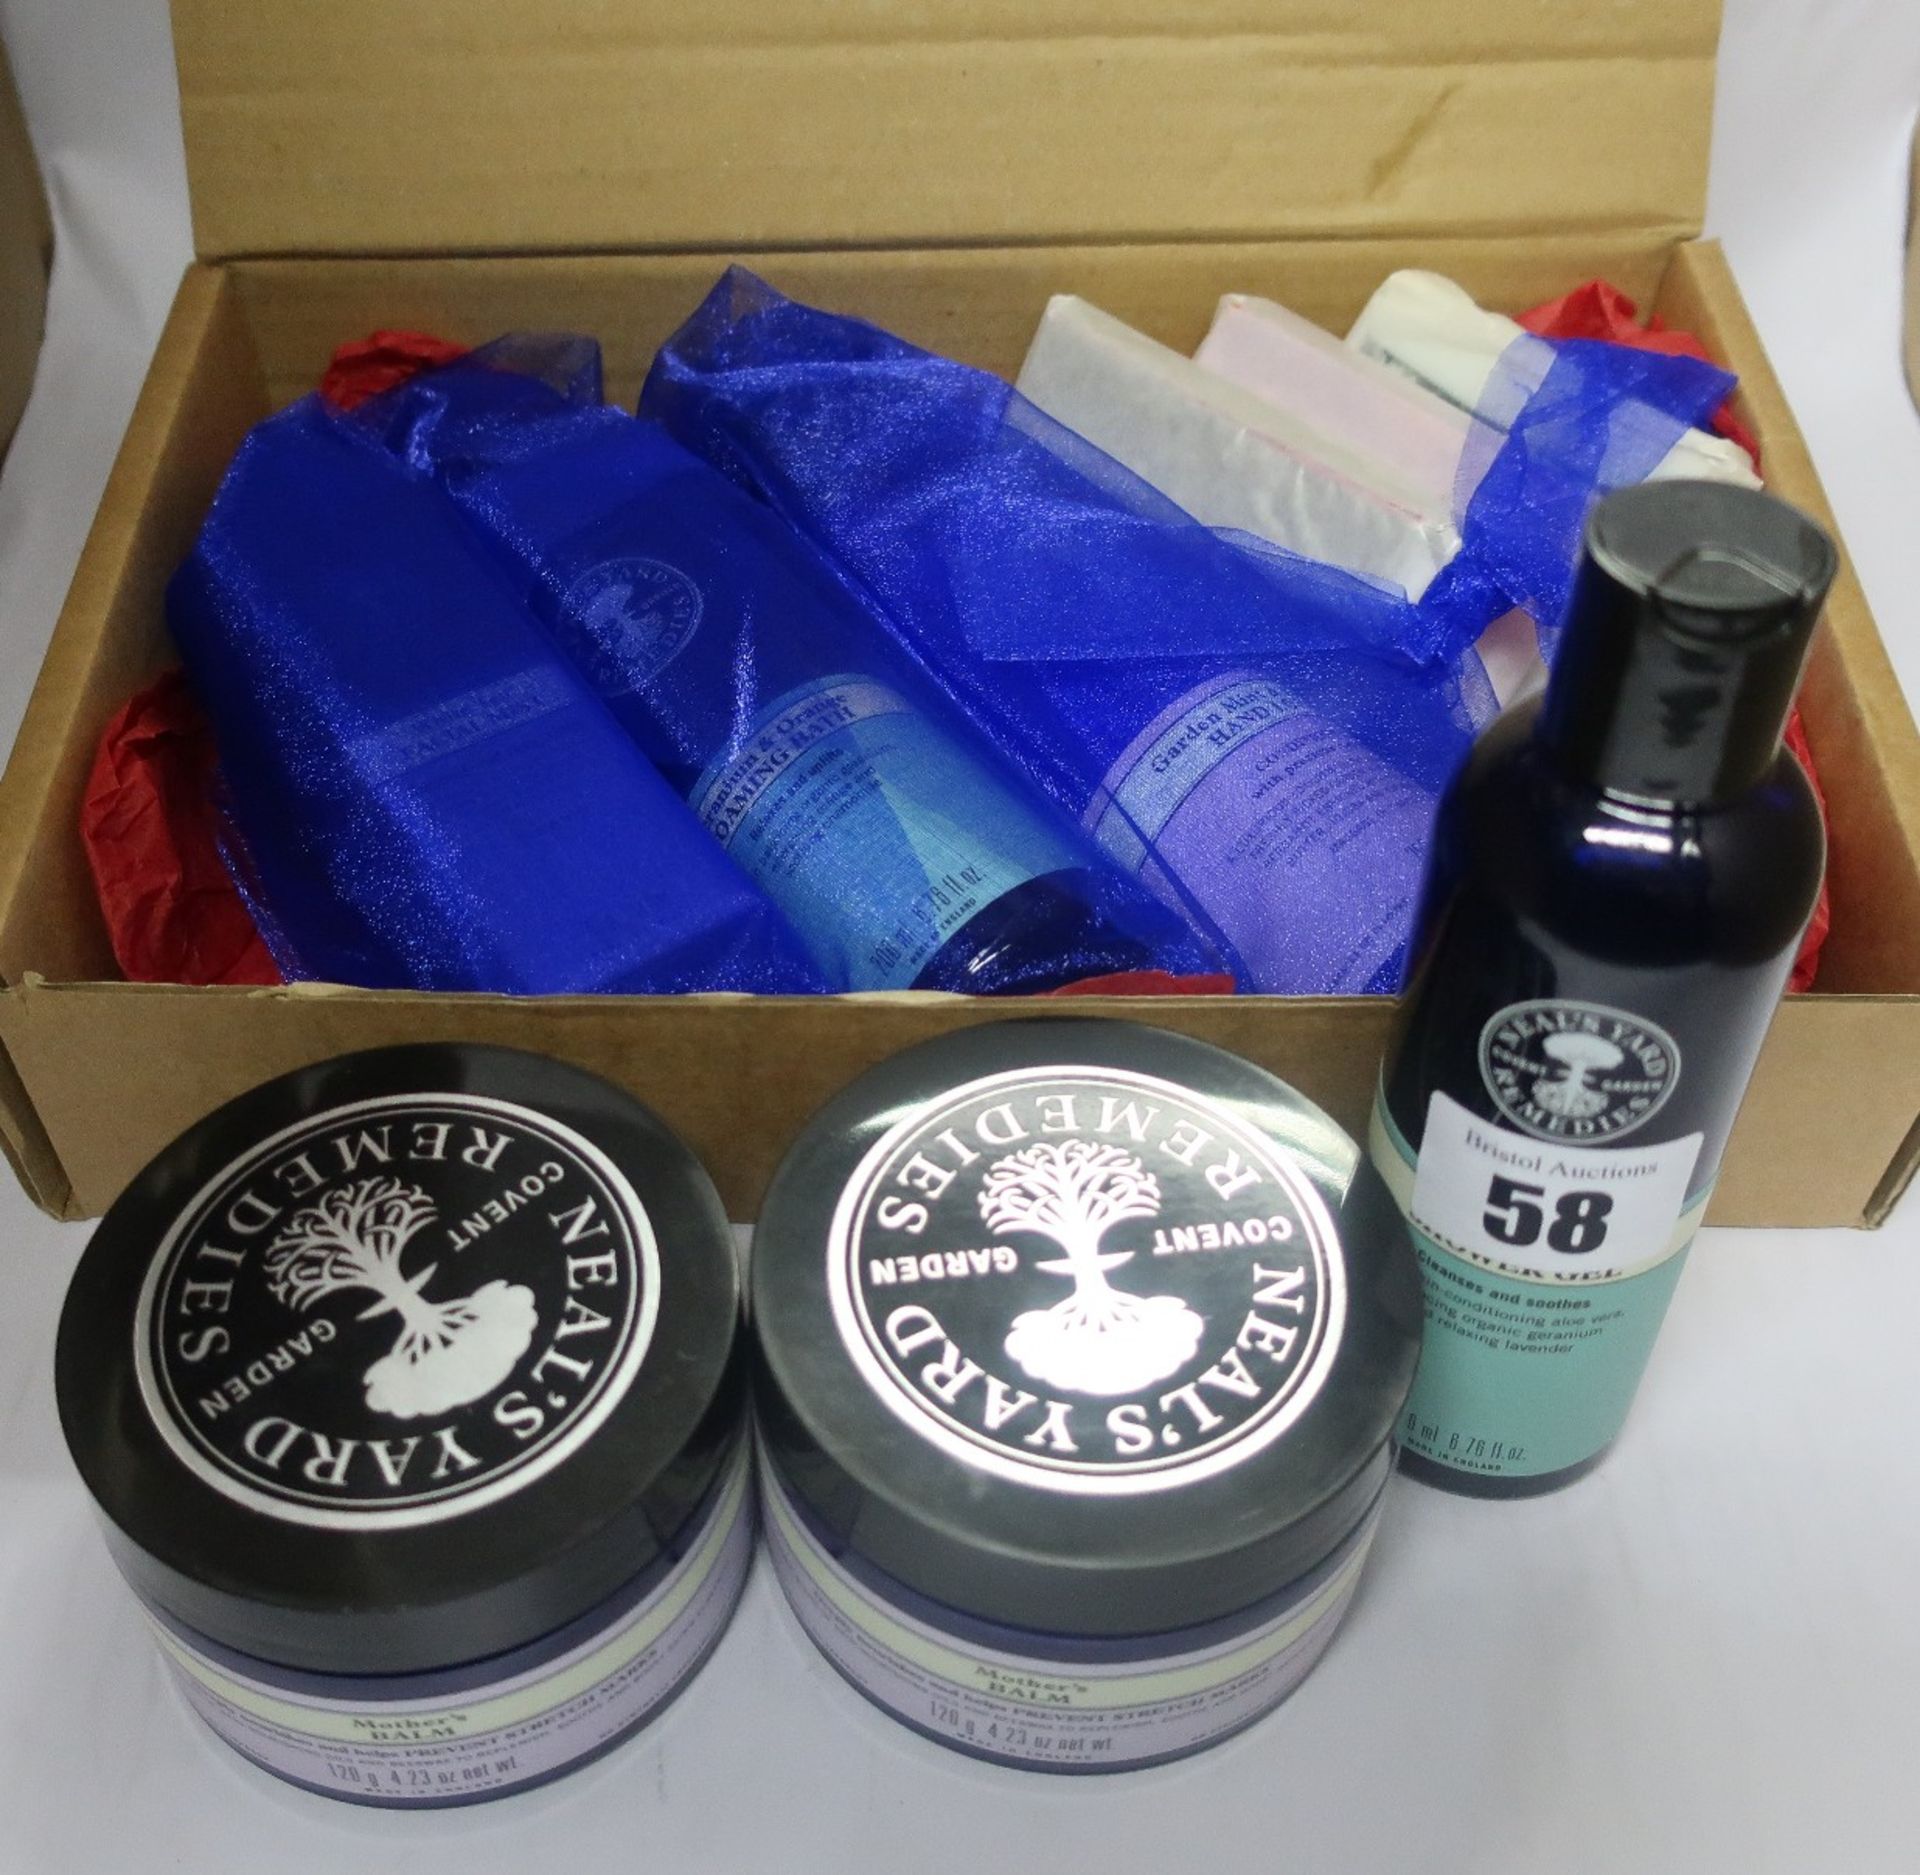 An as new Neal's Yard Wild Rose beauty balm gift set, two Neal's Yard Mother's balm cream (120g) and